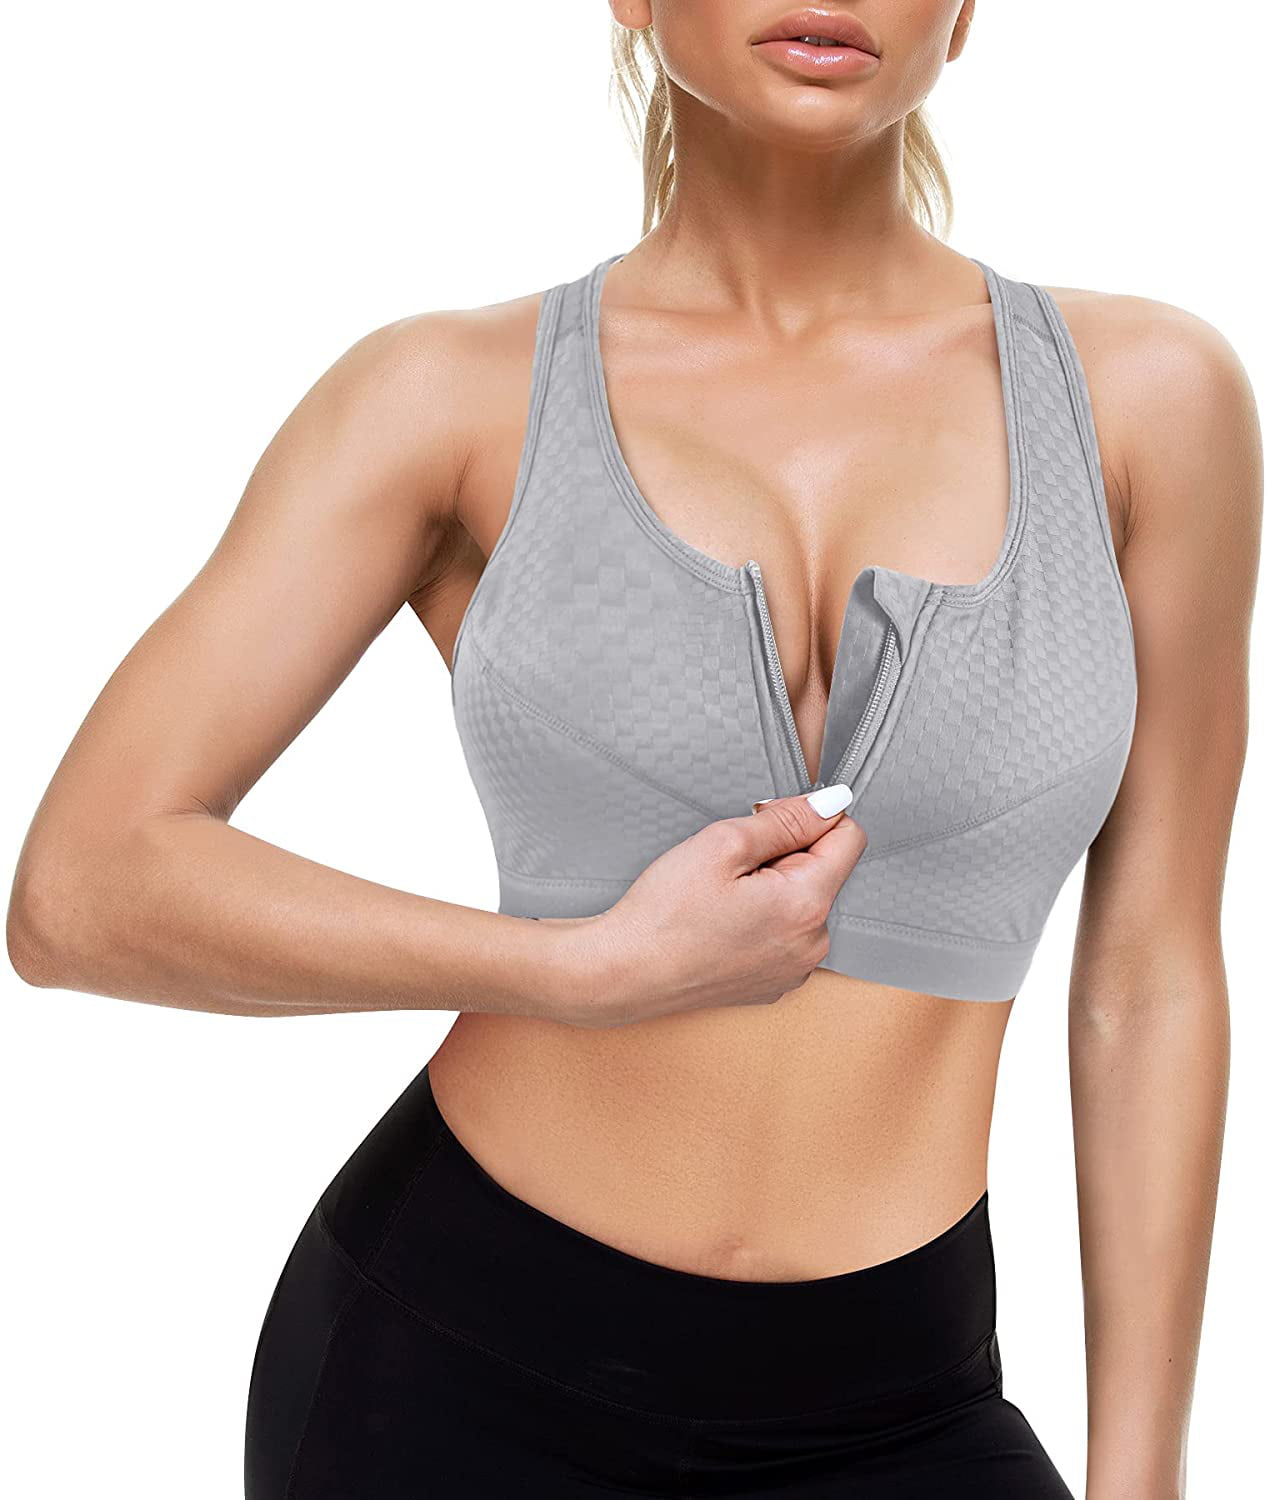 IHHCOXK Zip Front Sports Bras for Women Medium Support Racerback Bras with Removable Padded Wirefree Workout Yoga Tops